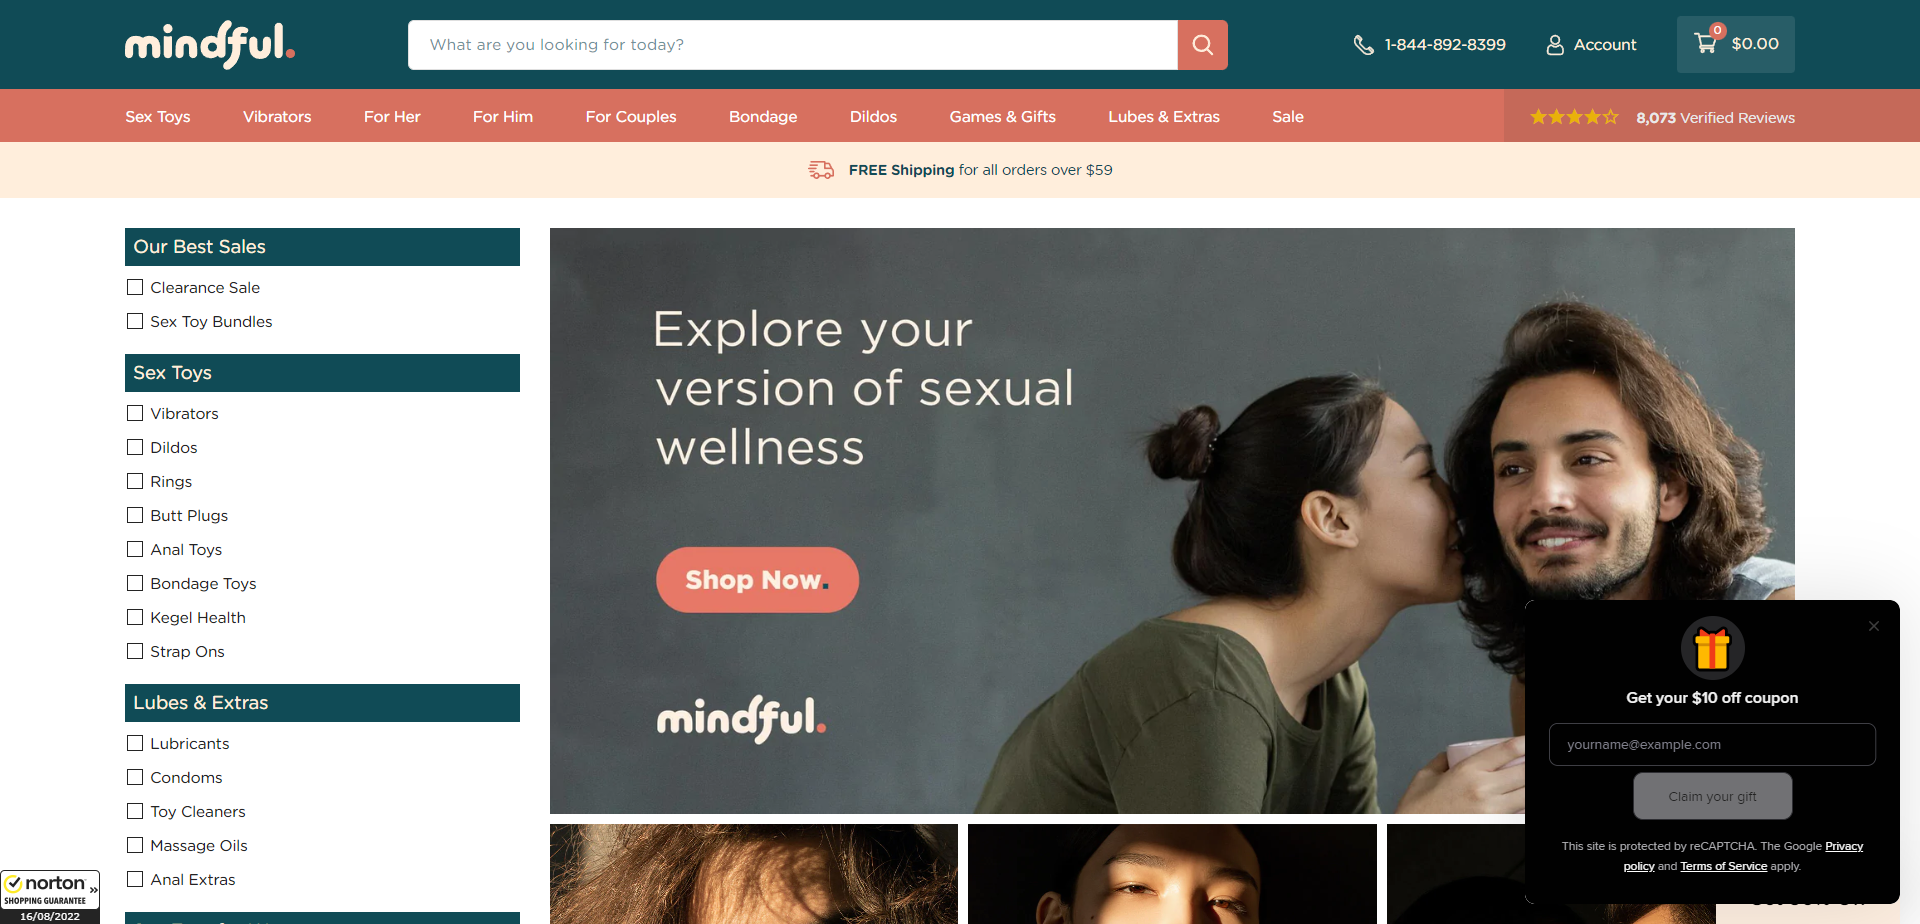 Referral Landing Page for Just Mindful